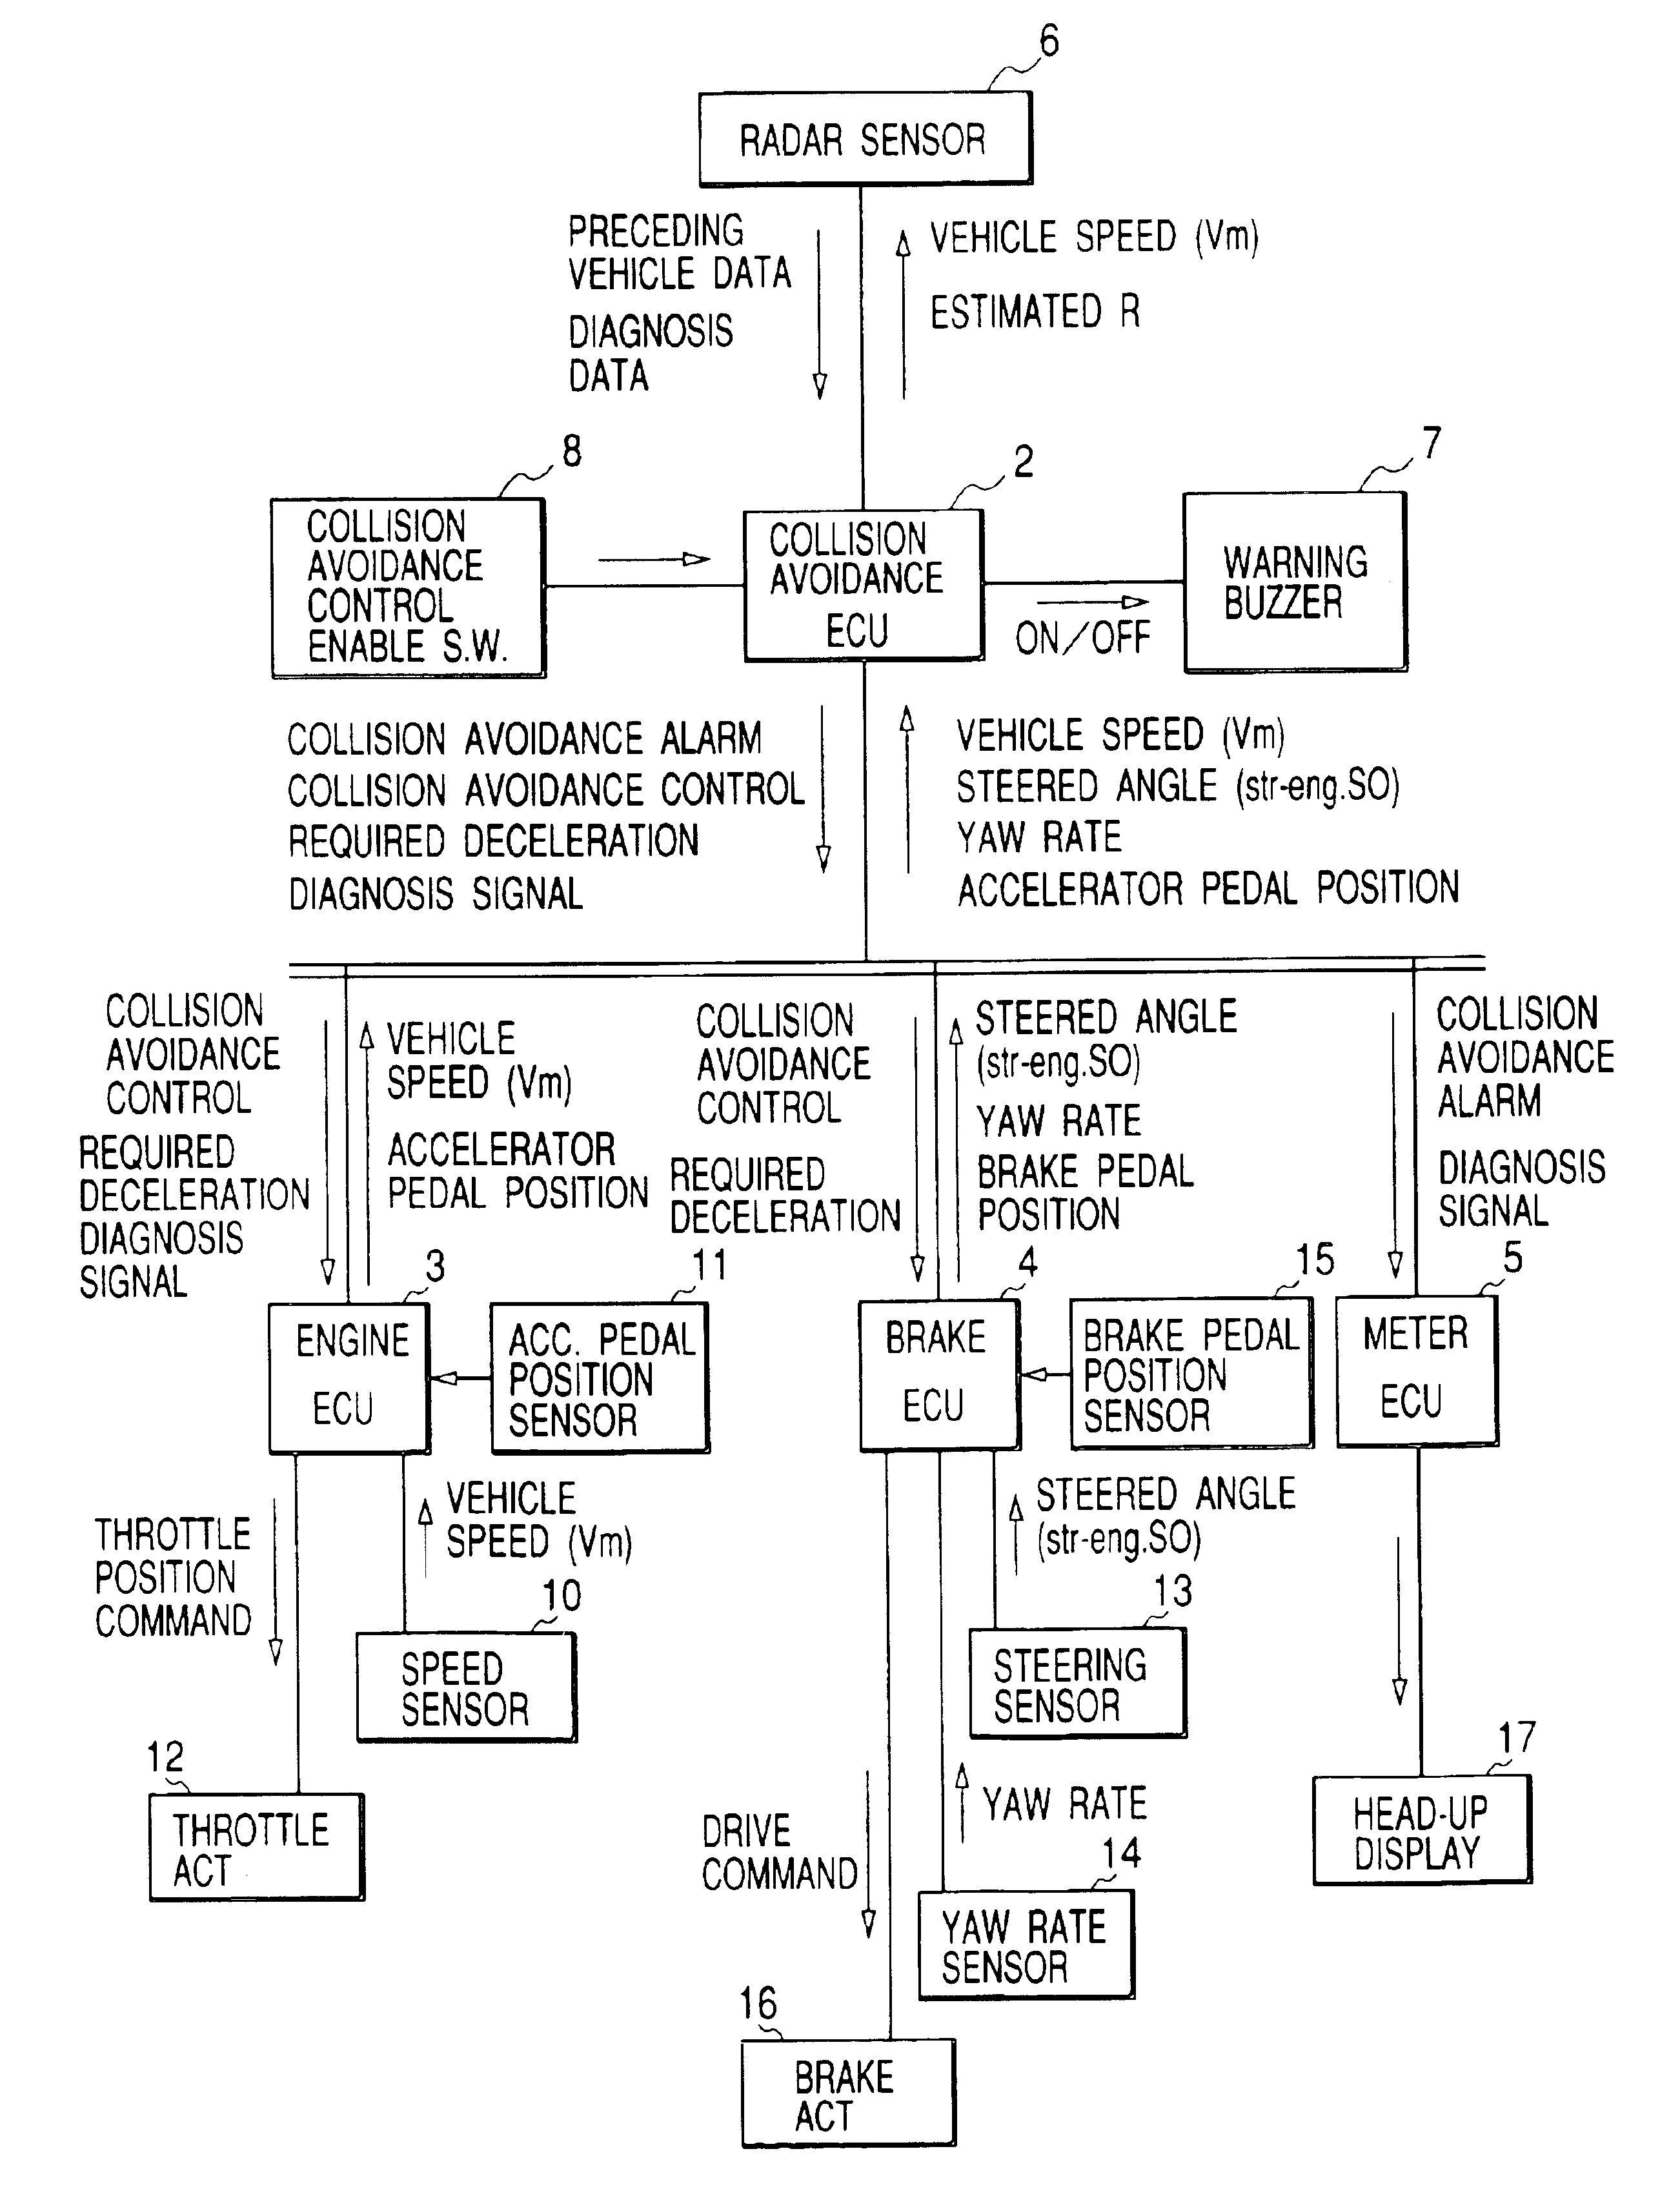 Collision avoidance control system for vehicle